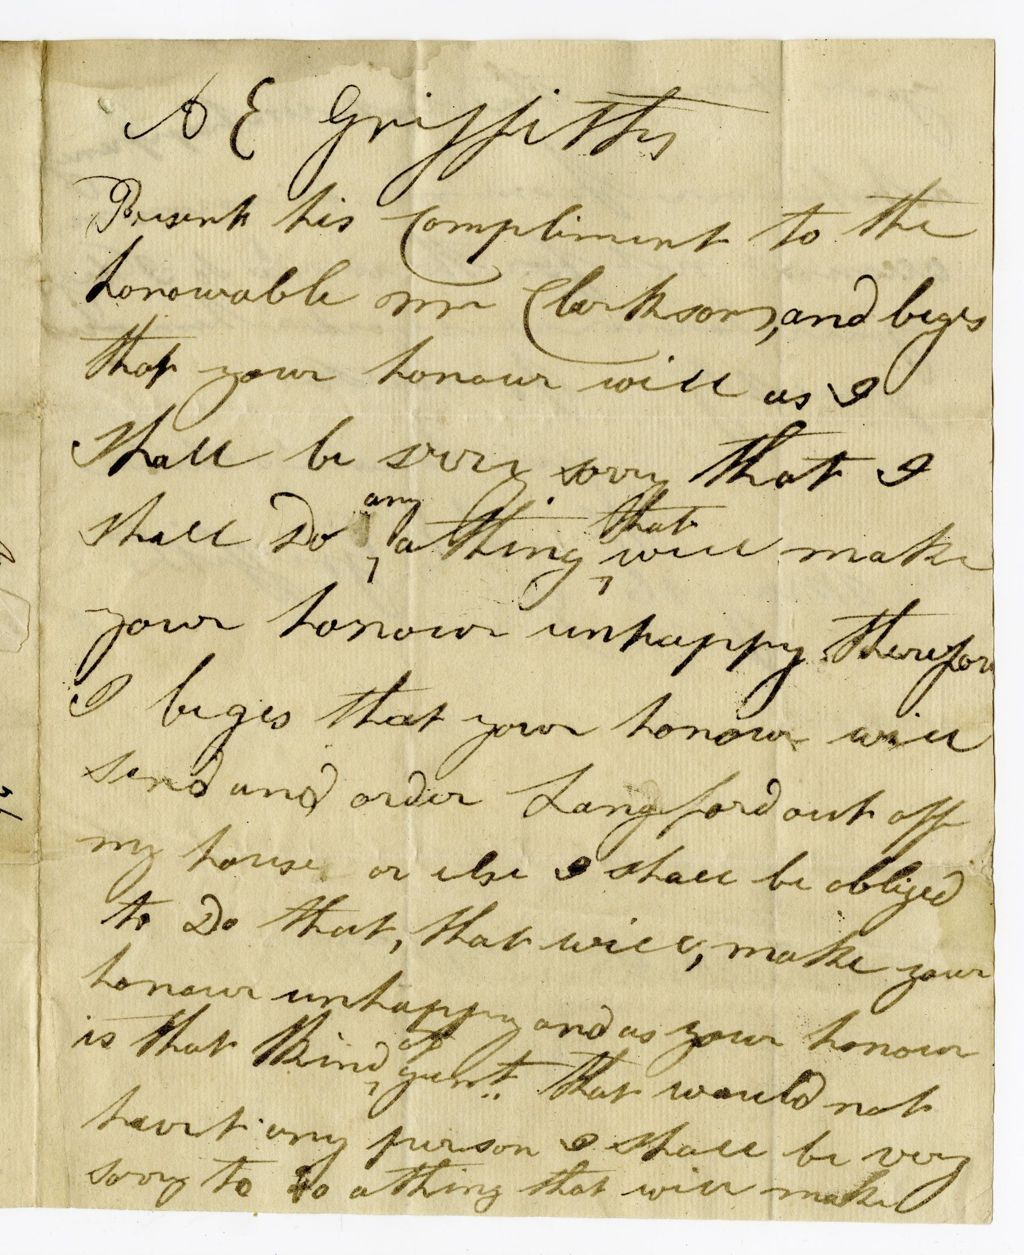 Letter from A. E. Griffiths to John Clarkson